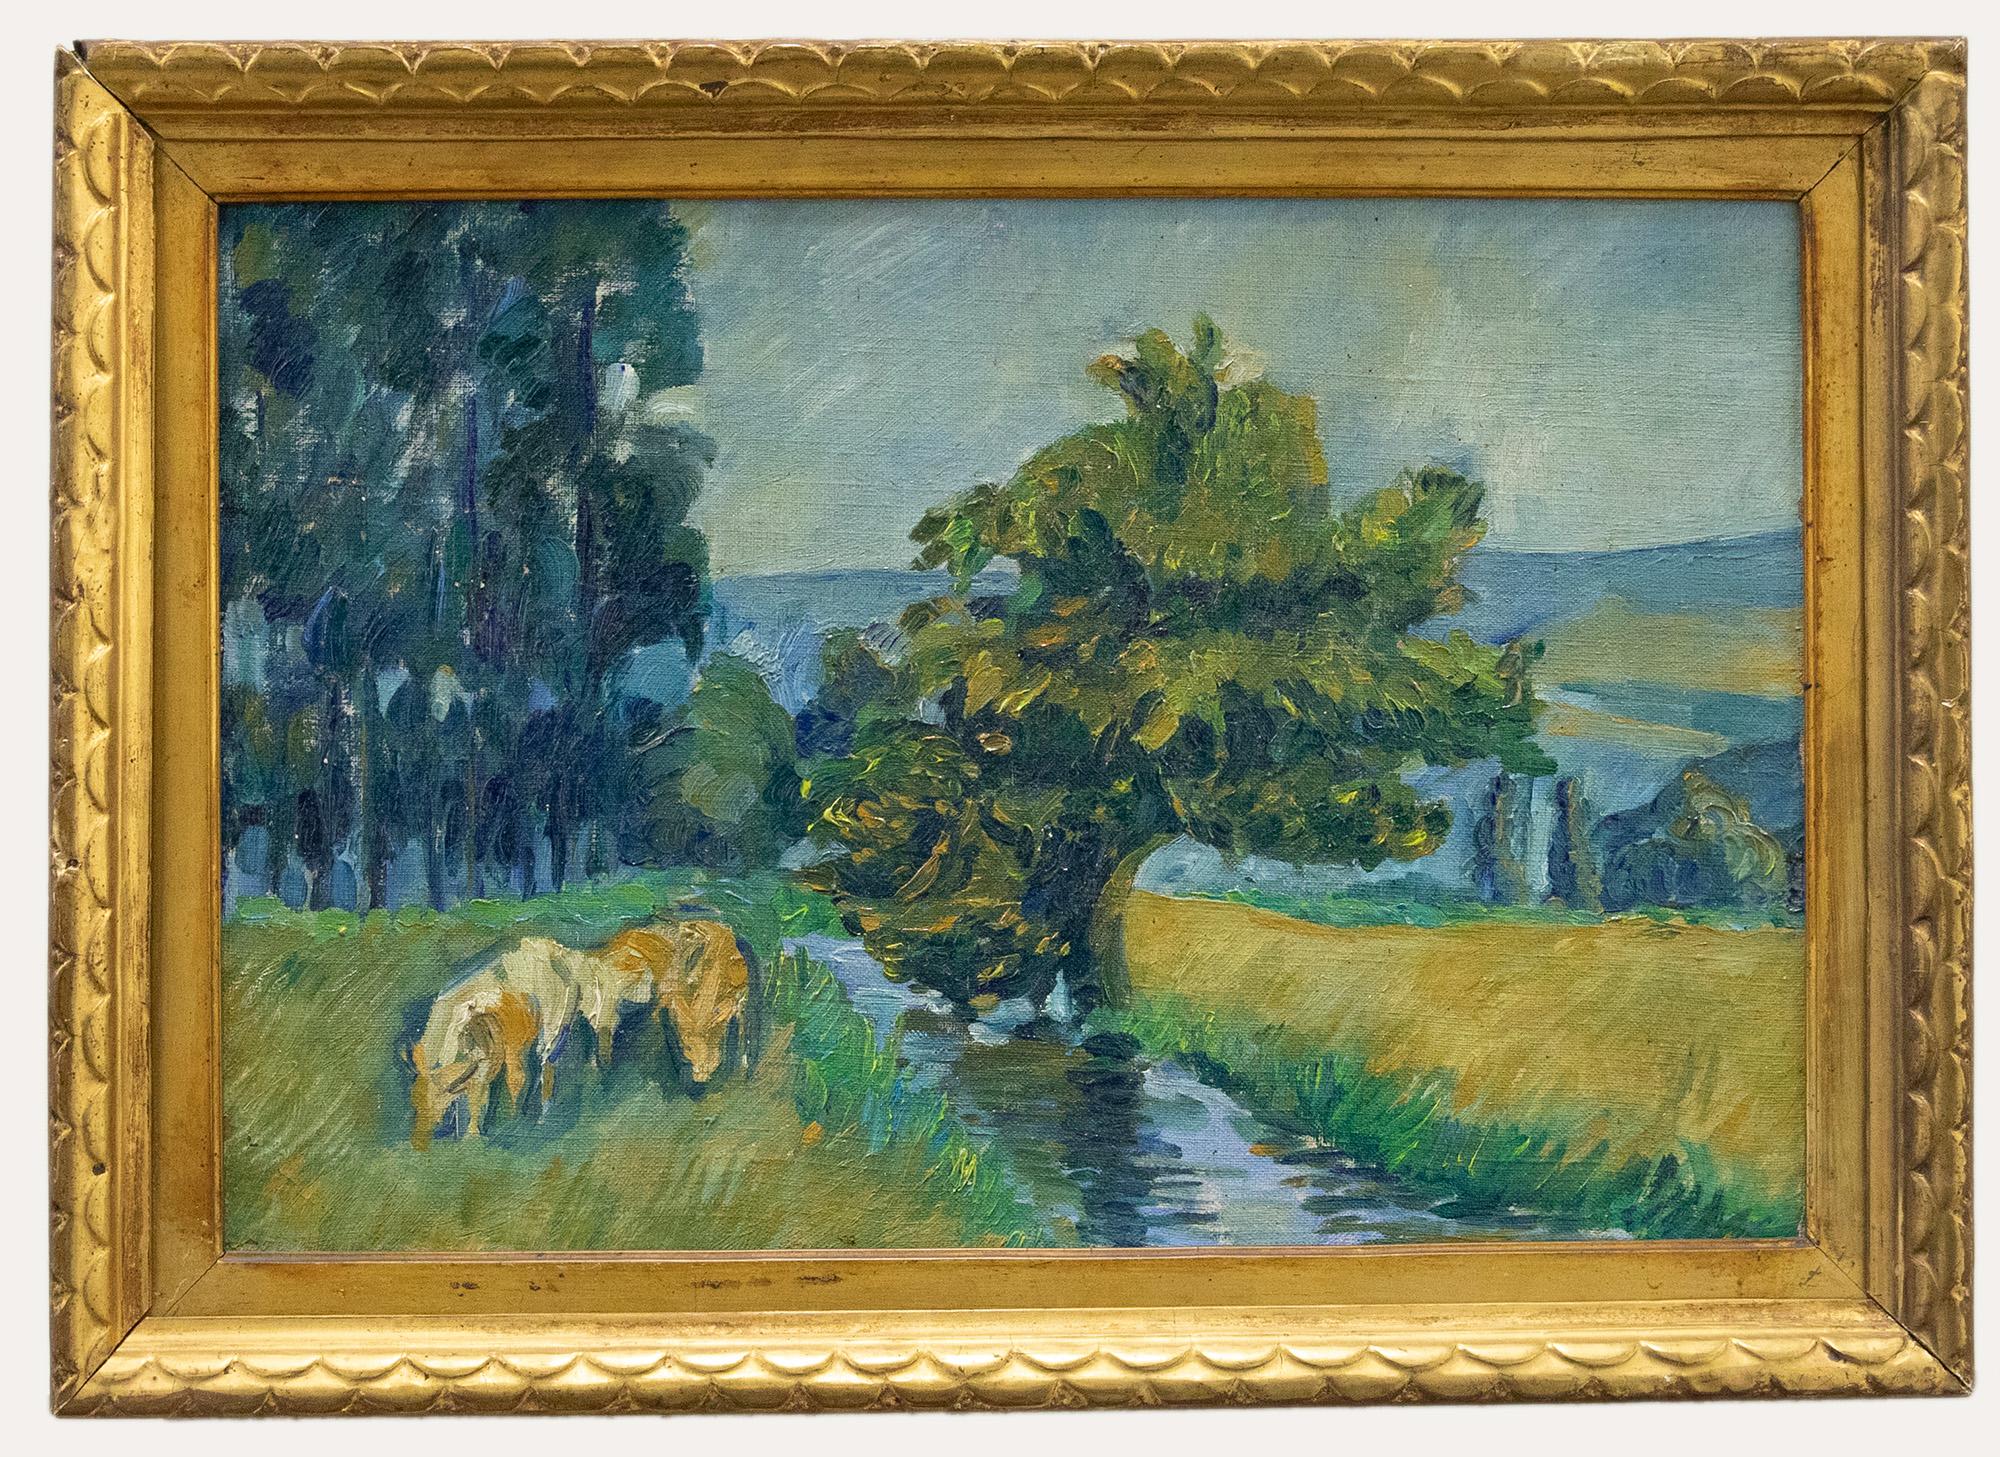 Unknown Landscape Painting - 20th Century Oil, Grazing by the Stream